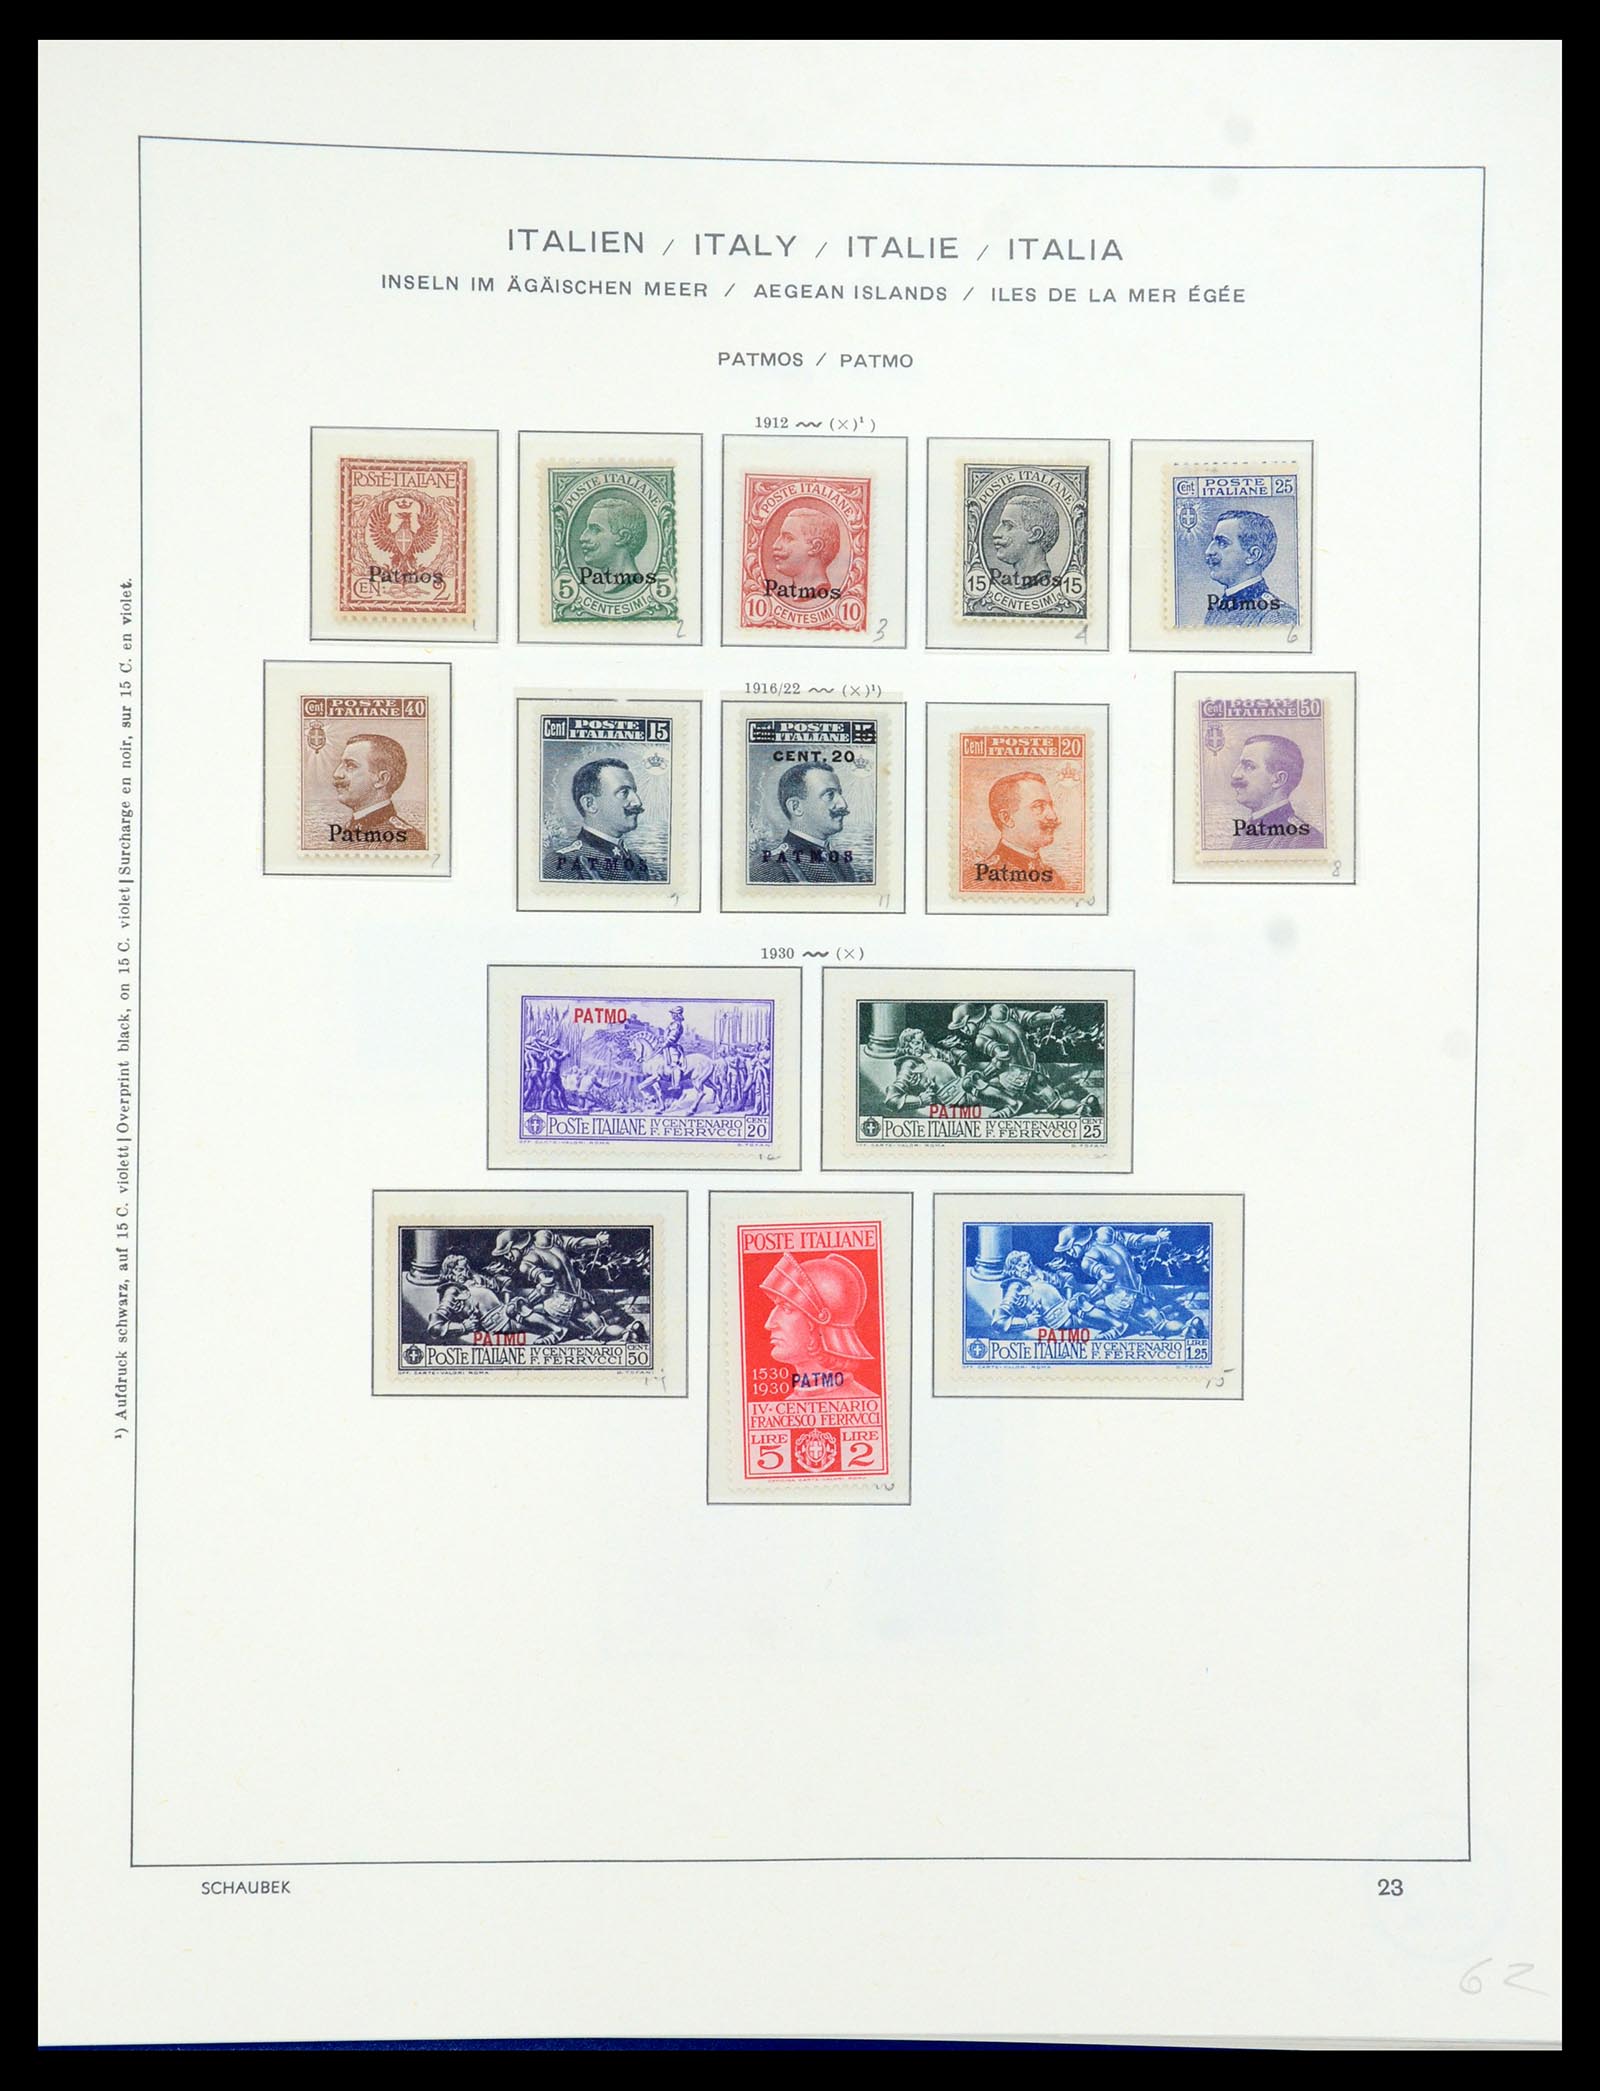 36181 029 - Stamp collection 36181 Italian Aegean Islands 1912-1941.